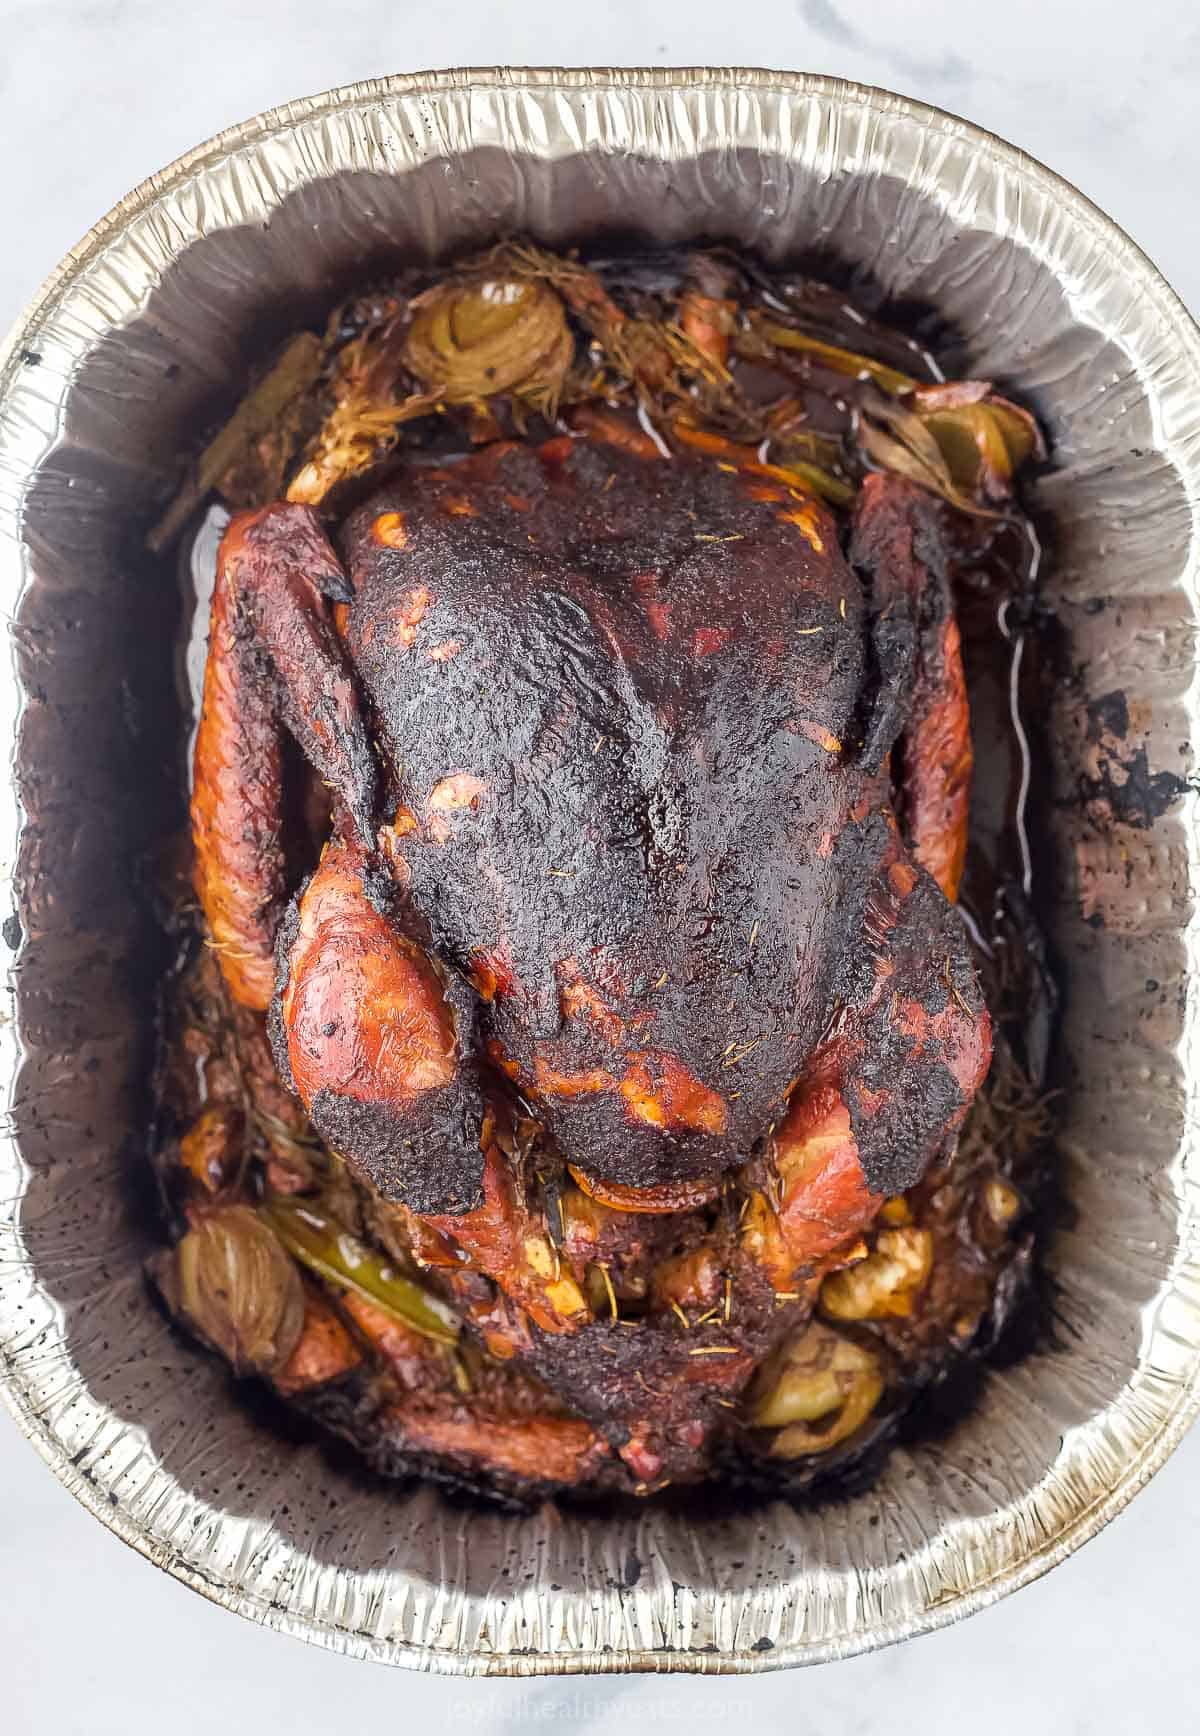 finished smoked turkey in a roasting pan